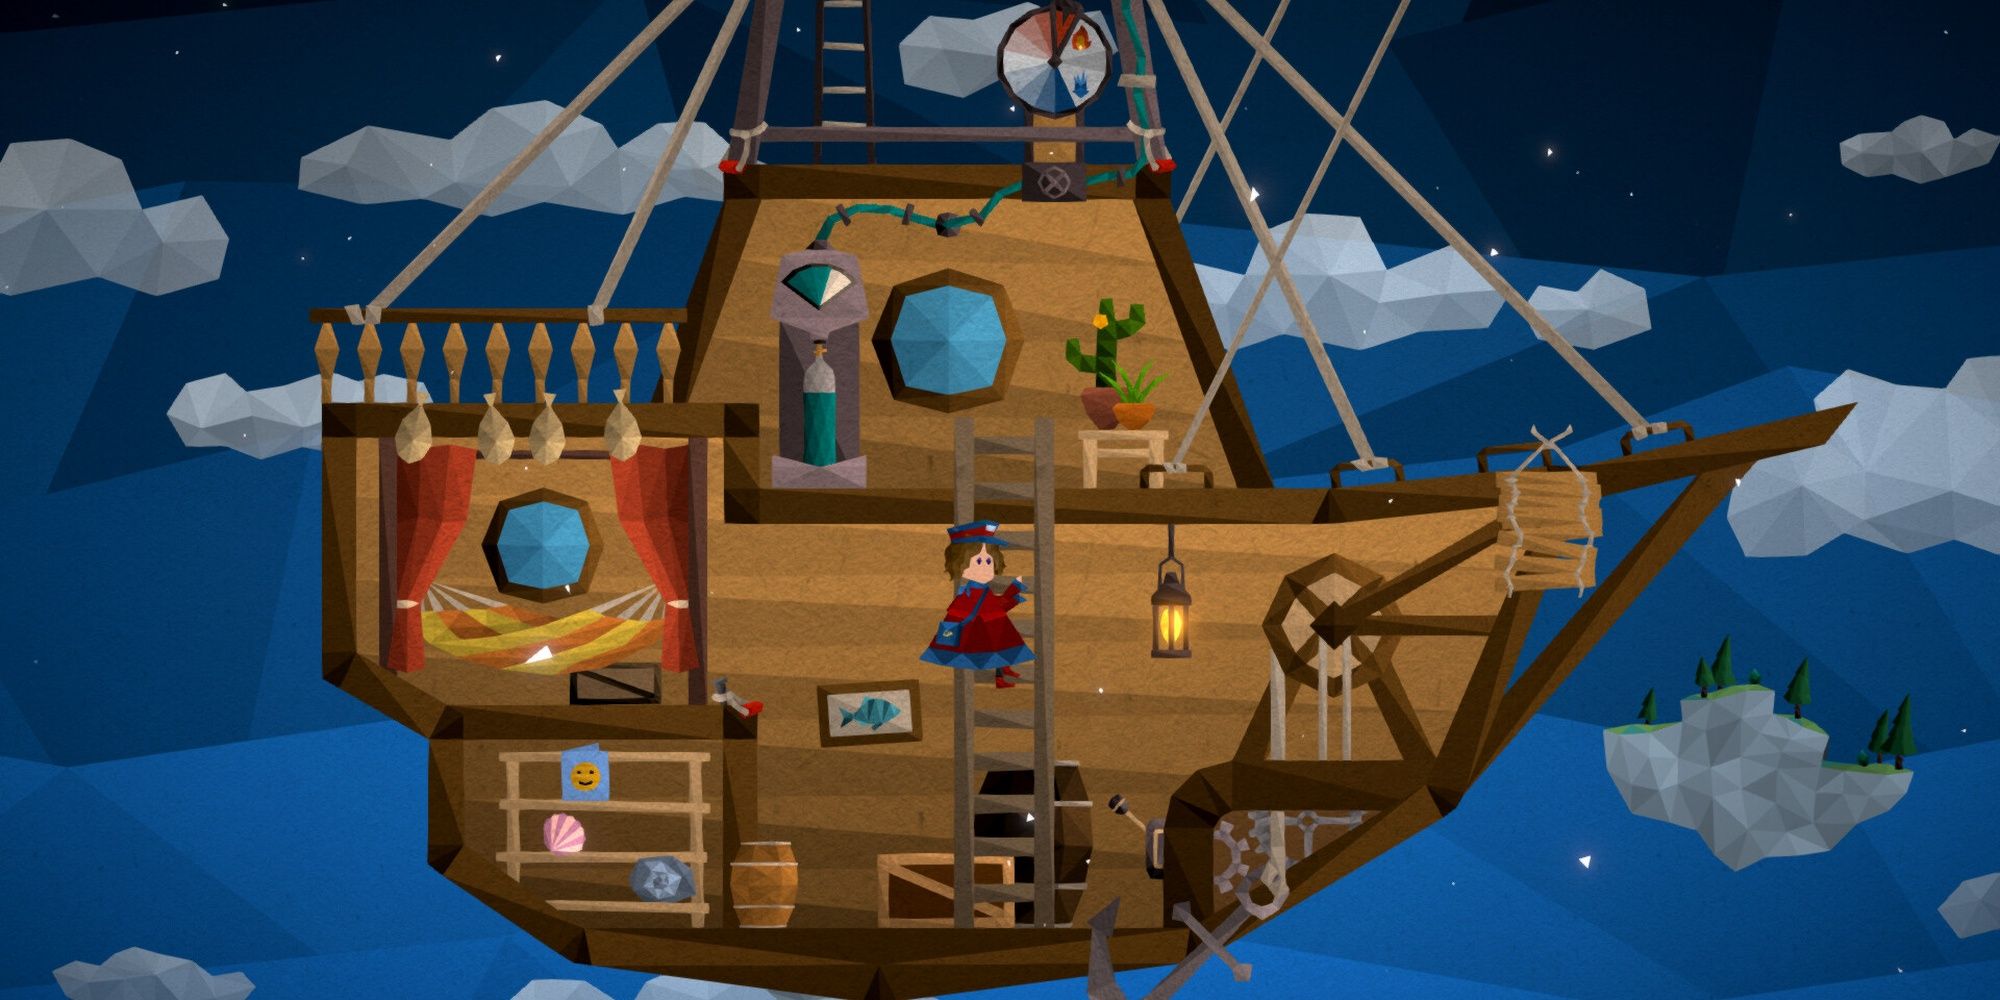 Passing By: A Tailwind Journey - The Explorable Rooms Within The Wooden Airship